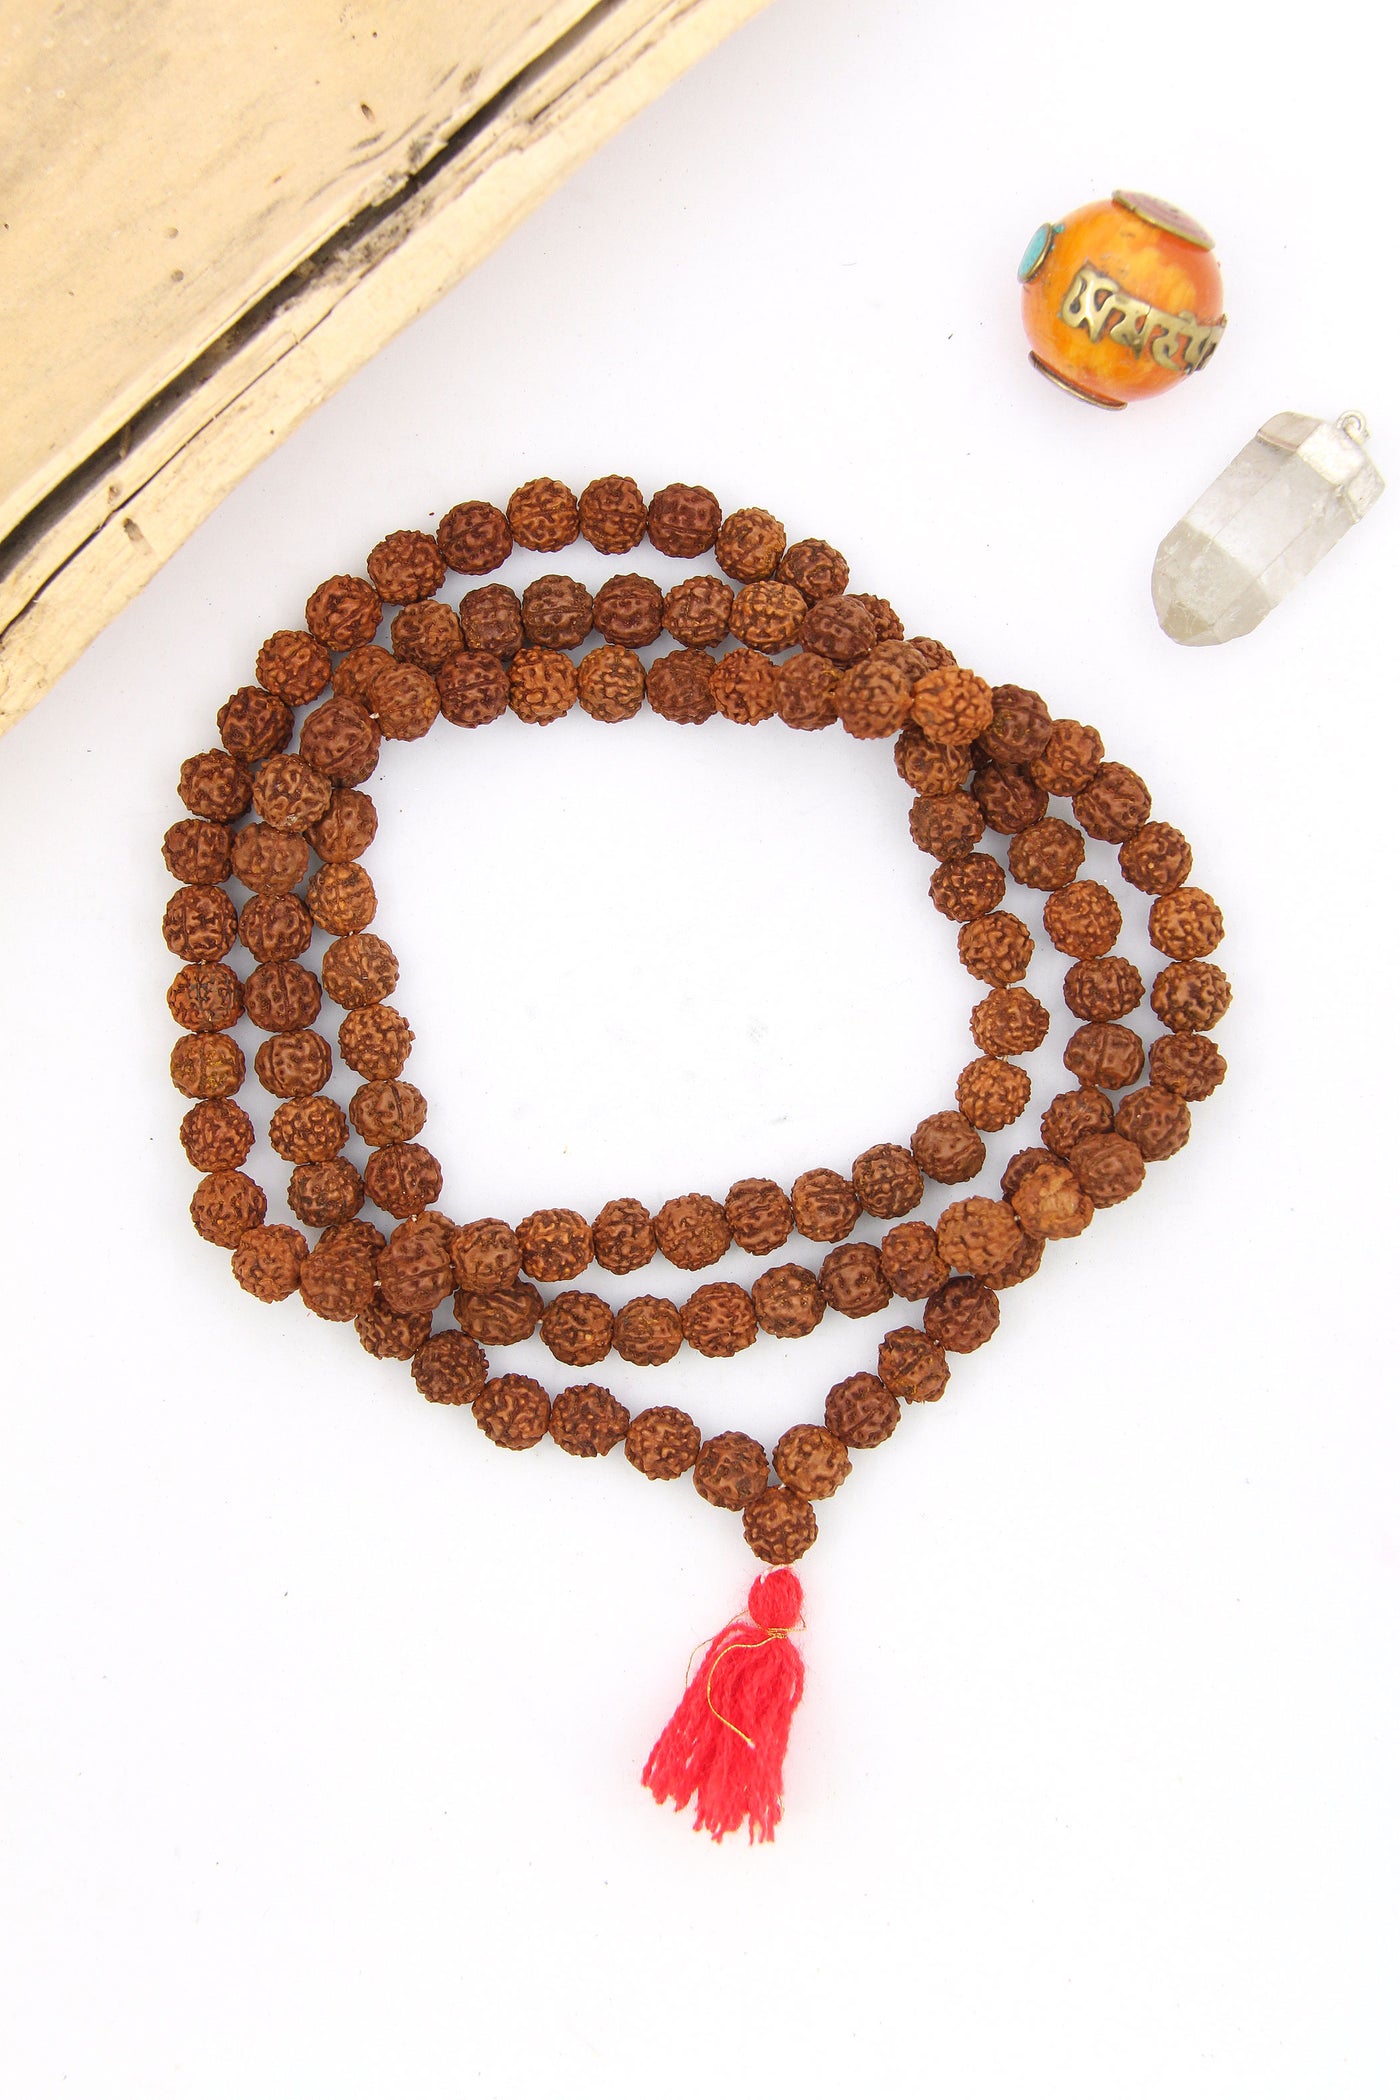 Authentic Natural Prayer Beads from India